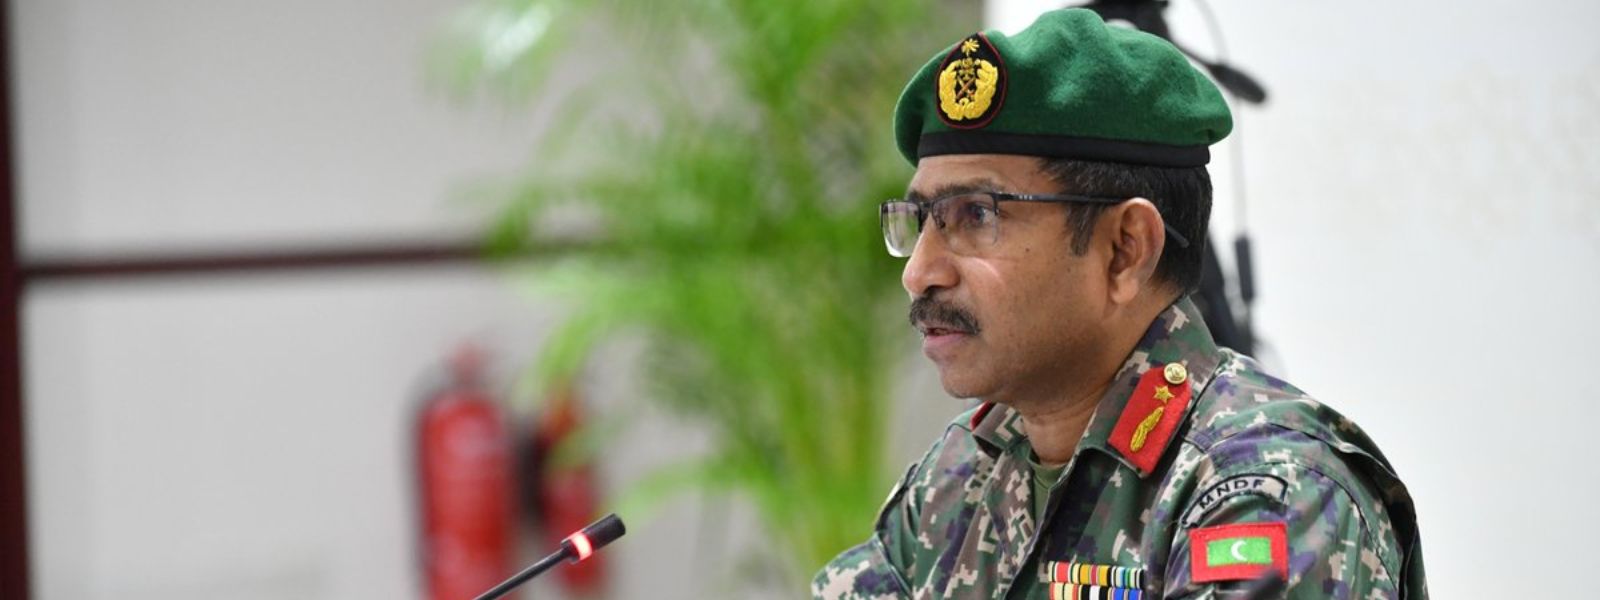 Maldivian Chief of Defense Force arrives in SL